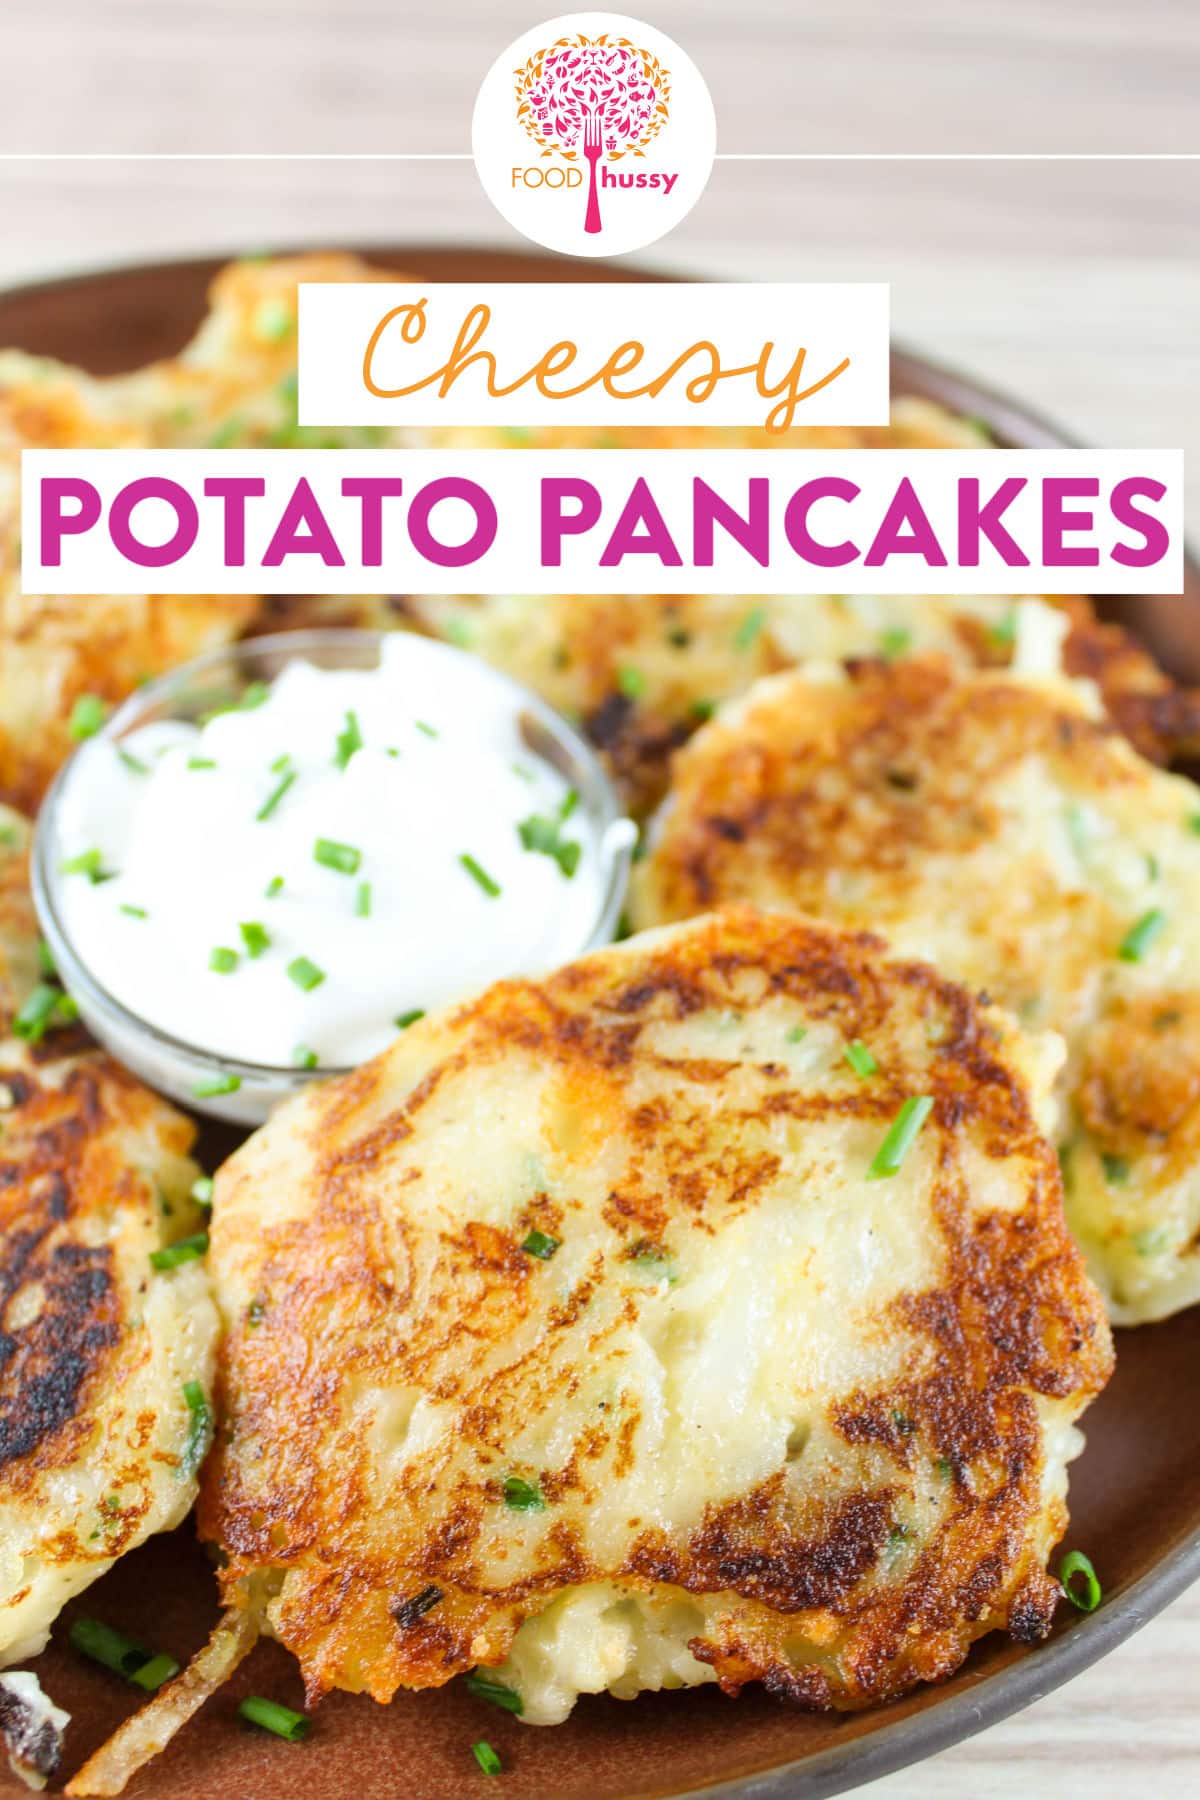 These White Cheddar Cheese Potato Pancakes are great for St. Patrick's Day or any time of the year! A great way to use leftover mashed potatoes, these potato pancakes are great as a side dish for dinner or a new take on hash browns for breakfast! via @foodhussy